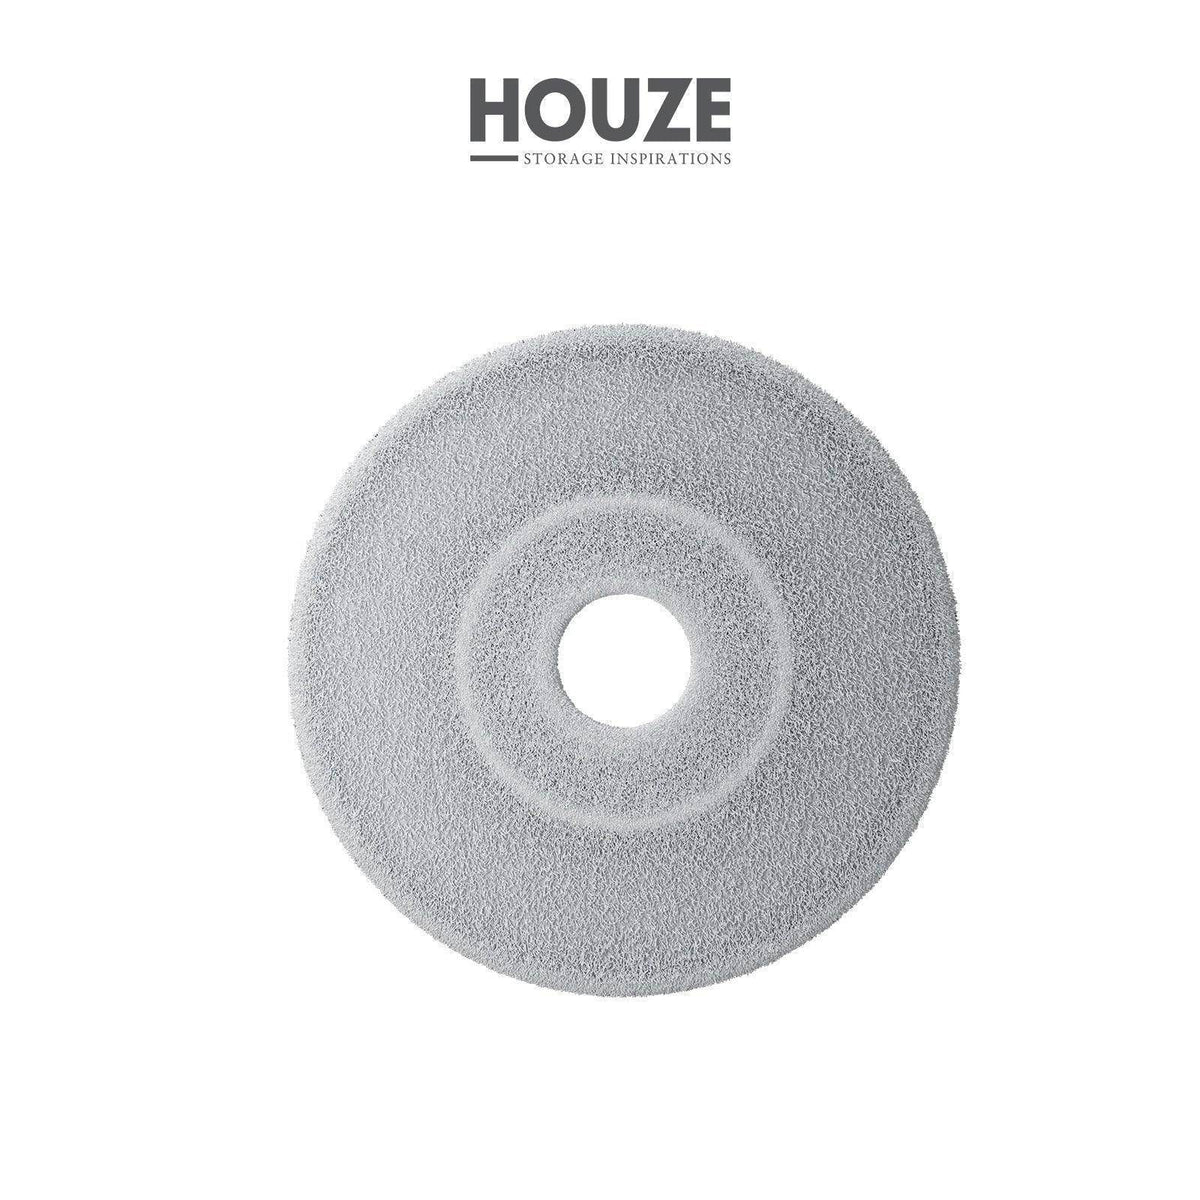 Houze - The Clean Water Spin Mop Refill Singapore